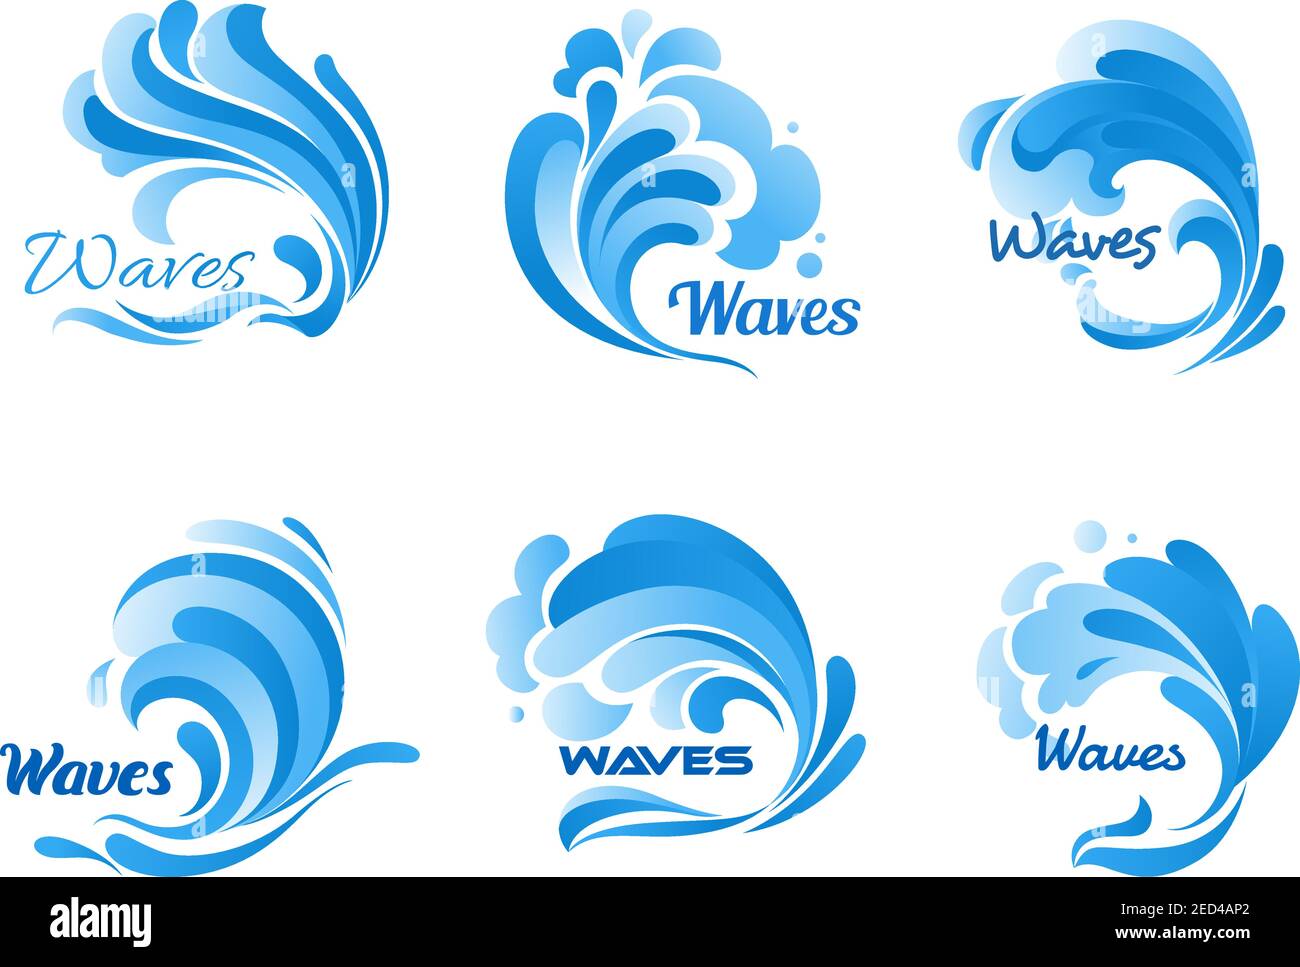 Waves vector isolated icons. Water ocean wave splash, tide water rollers, stormy curling, boiling and seething blue sea waves Stock Vector